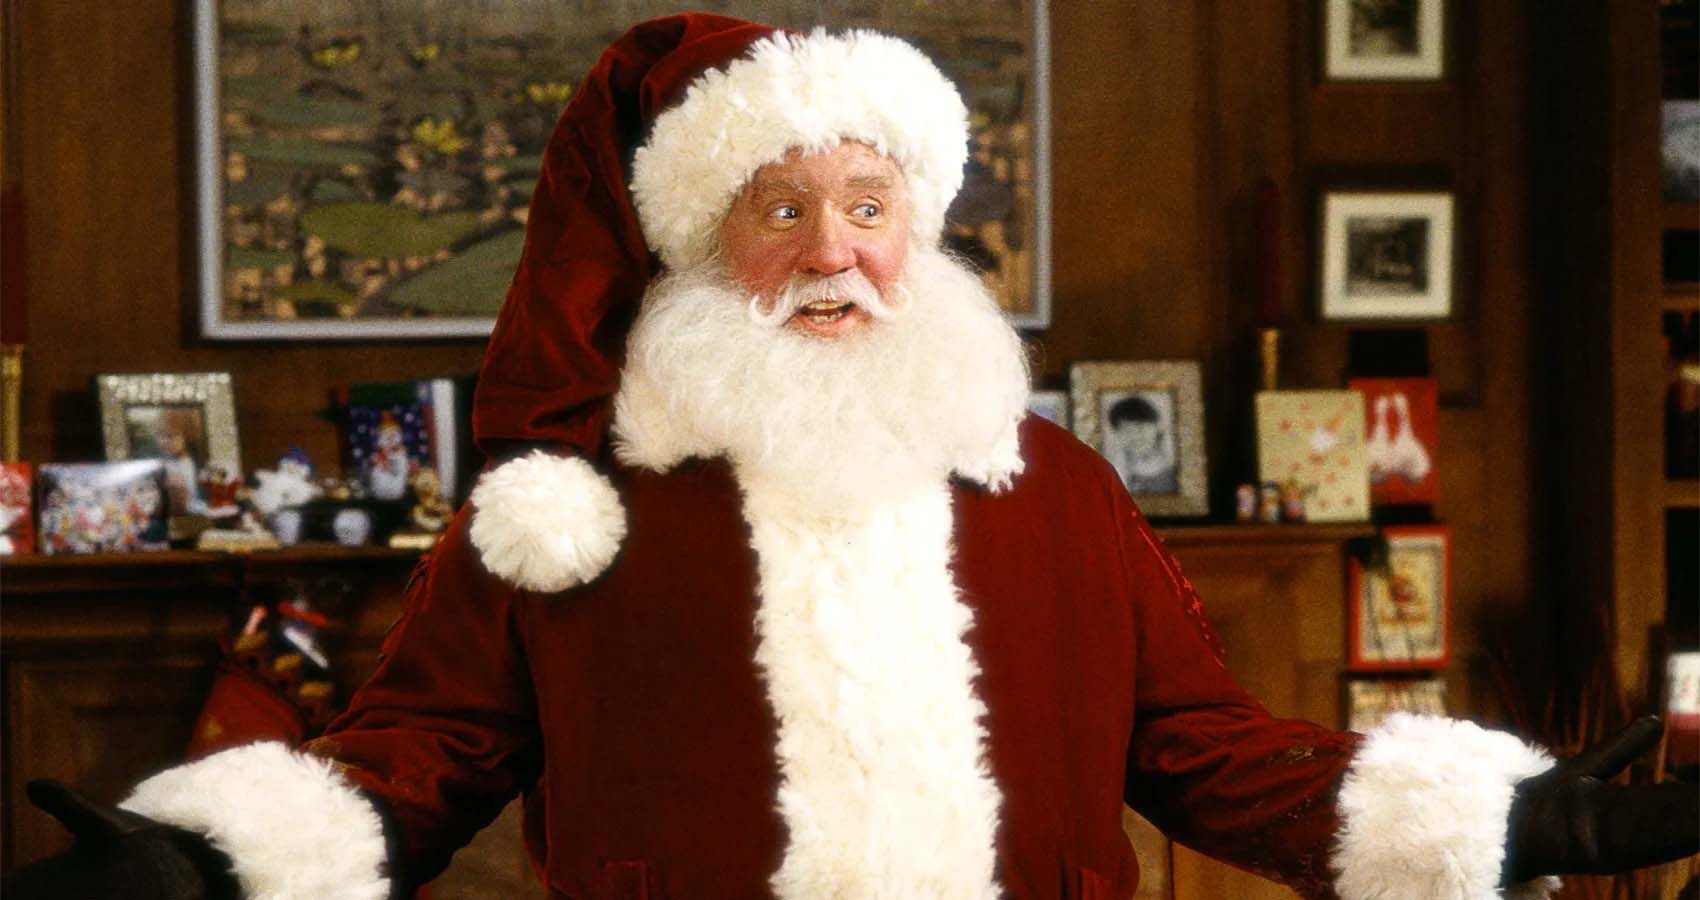 The Santa Clause Disney+ Series: What '90s Kids Hope to See